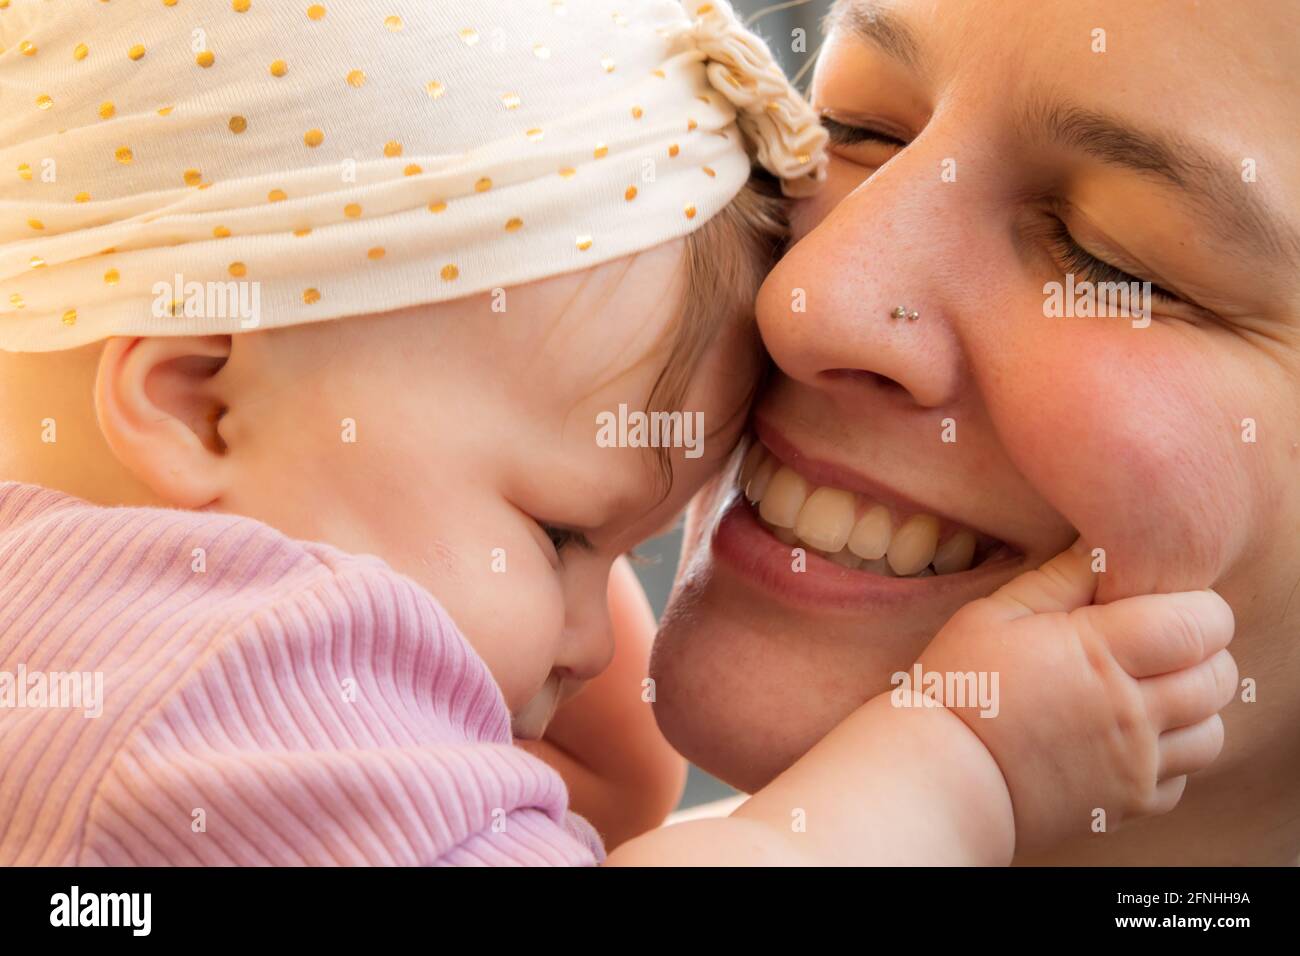 Close up of young mother with 5 month old baby, hugging, smiling, loving expression.  Baby with hat, holding mother's cheek. Stock Photo